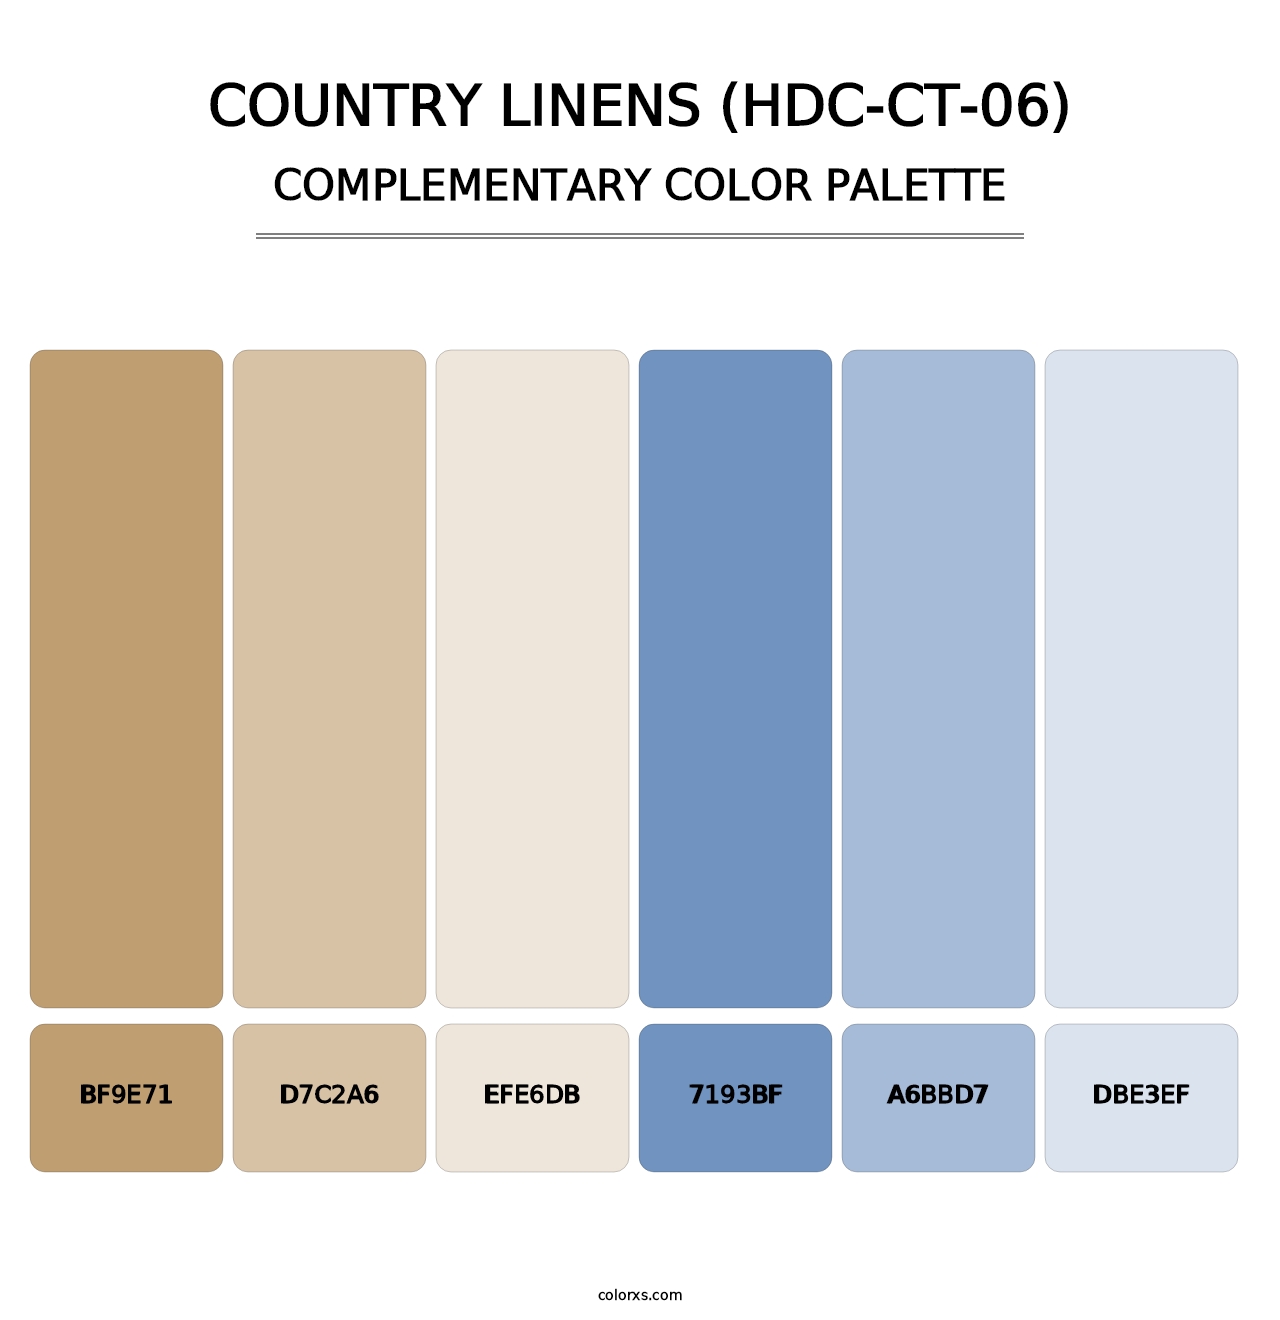 Country Linens (HDC-CT-06) - Complementary Color Palette